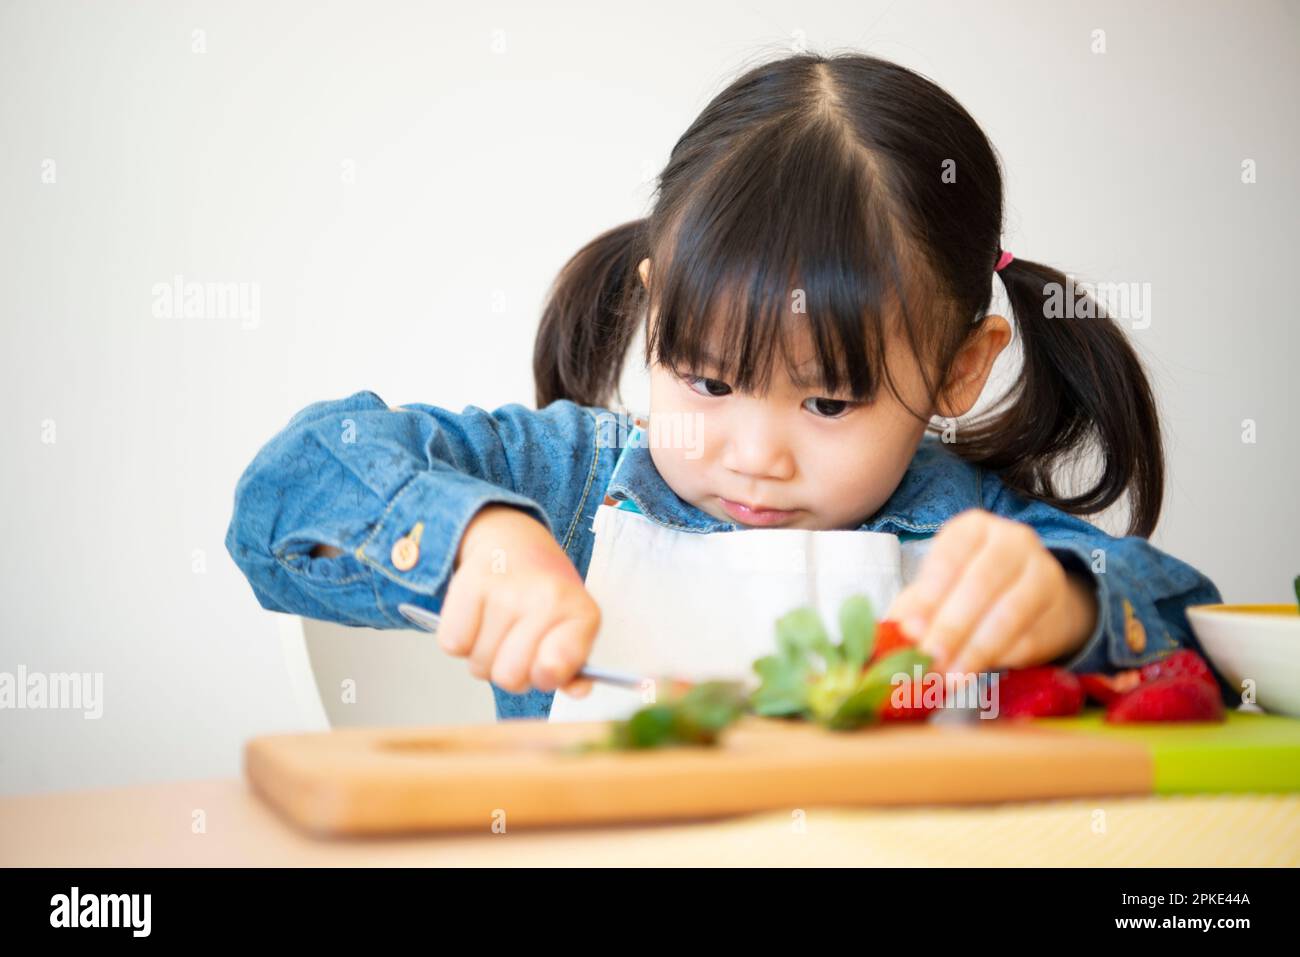 Girl seriously cutting strawberries Stock Photo